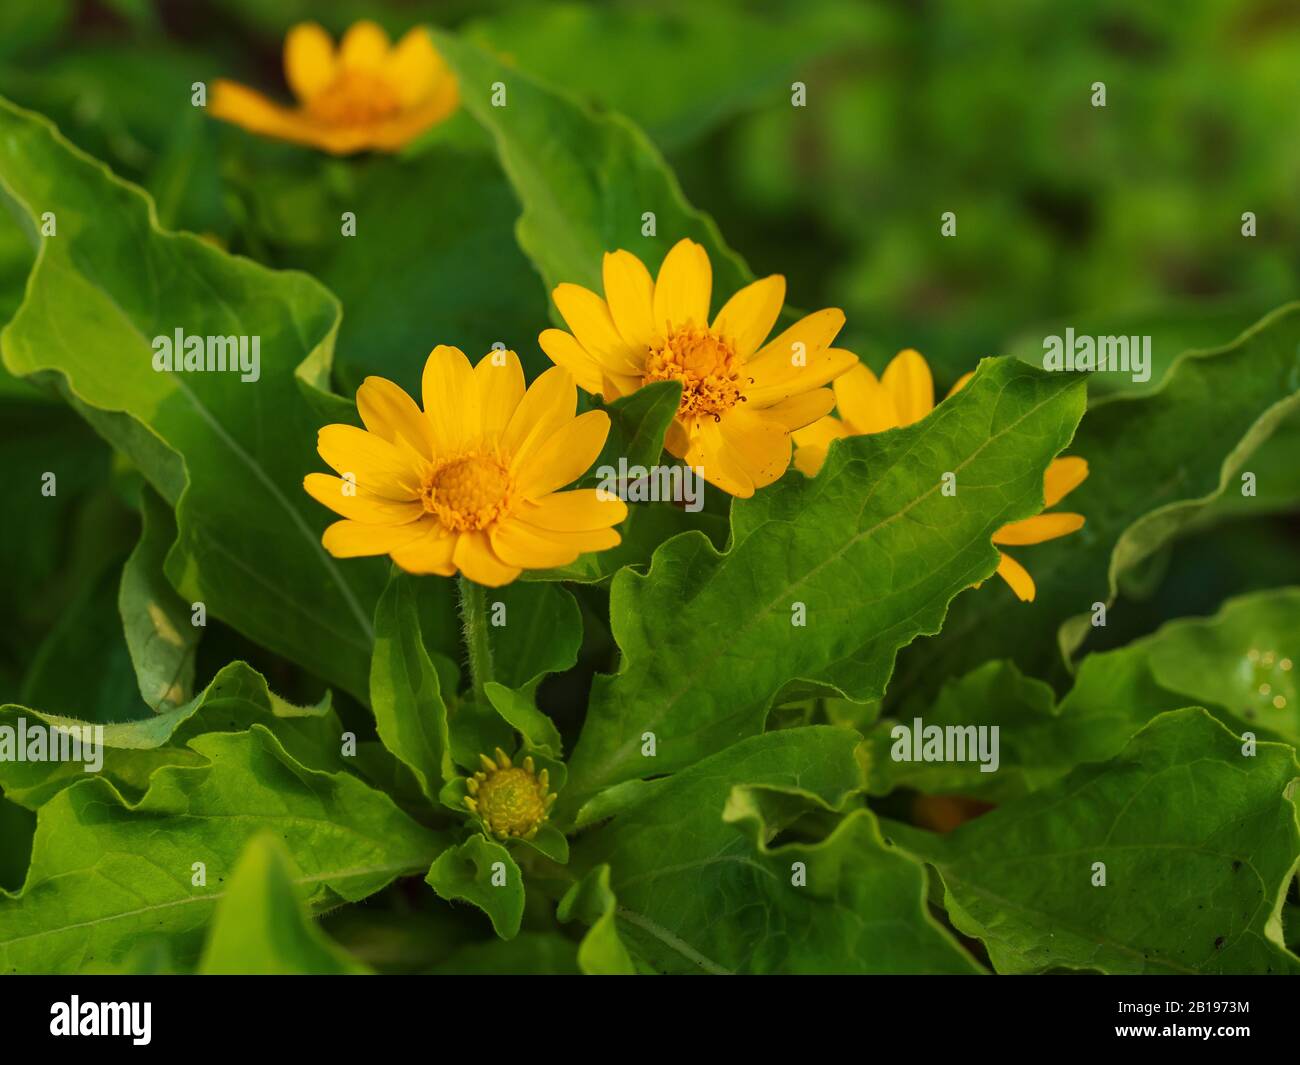 Close-up shot of the fresh and natural Wedelia trilobata yellow flower select focus shallow depth of field Stock Photo